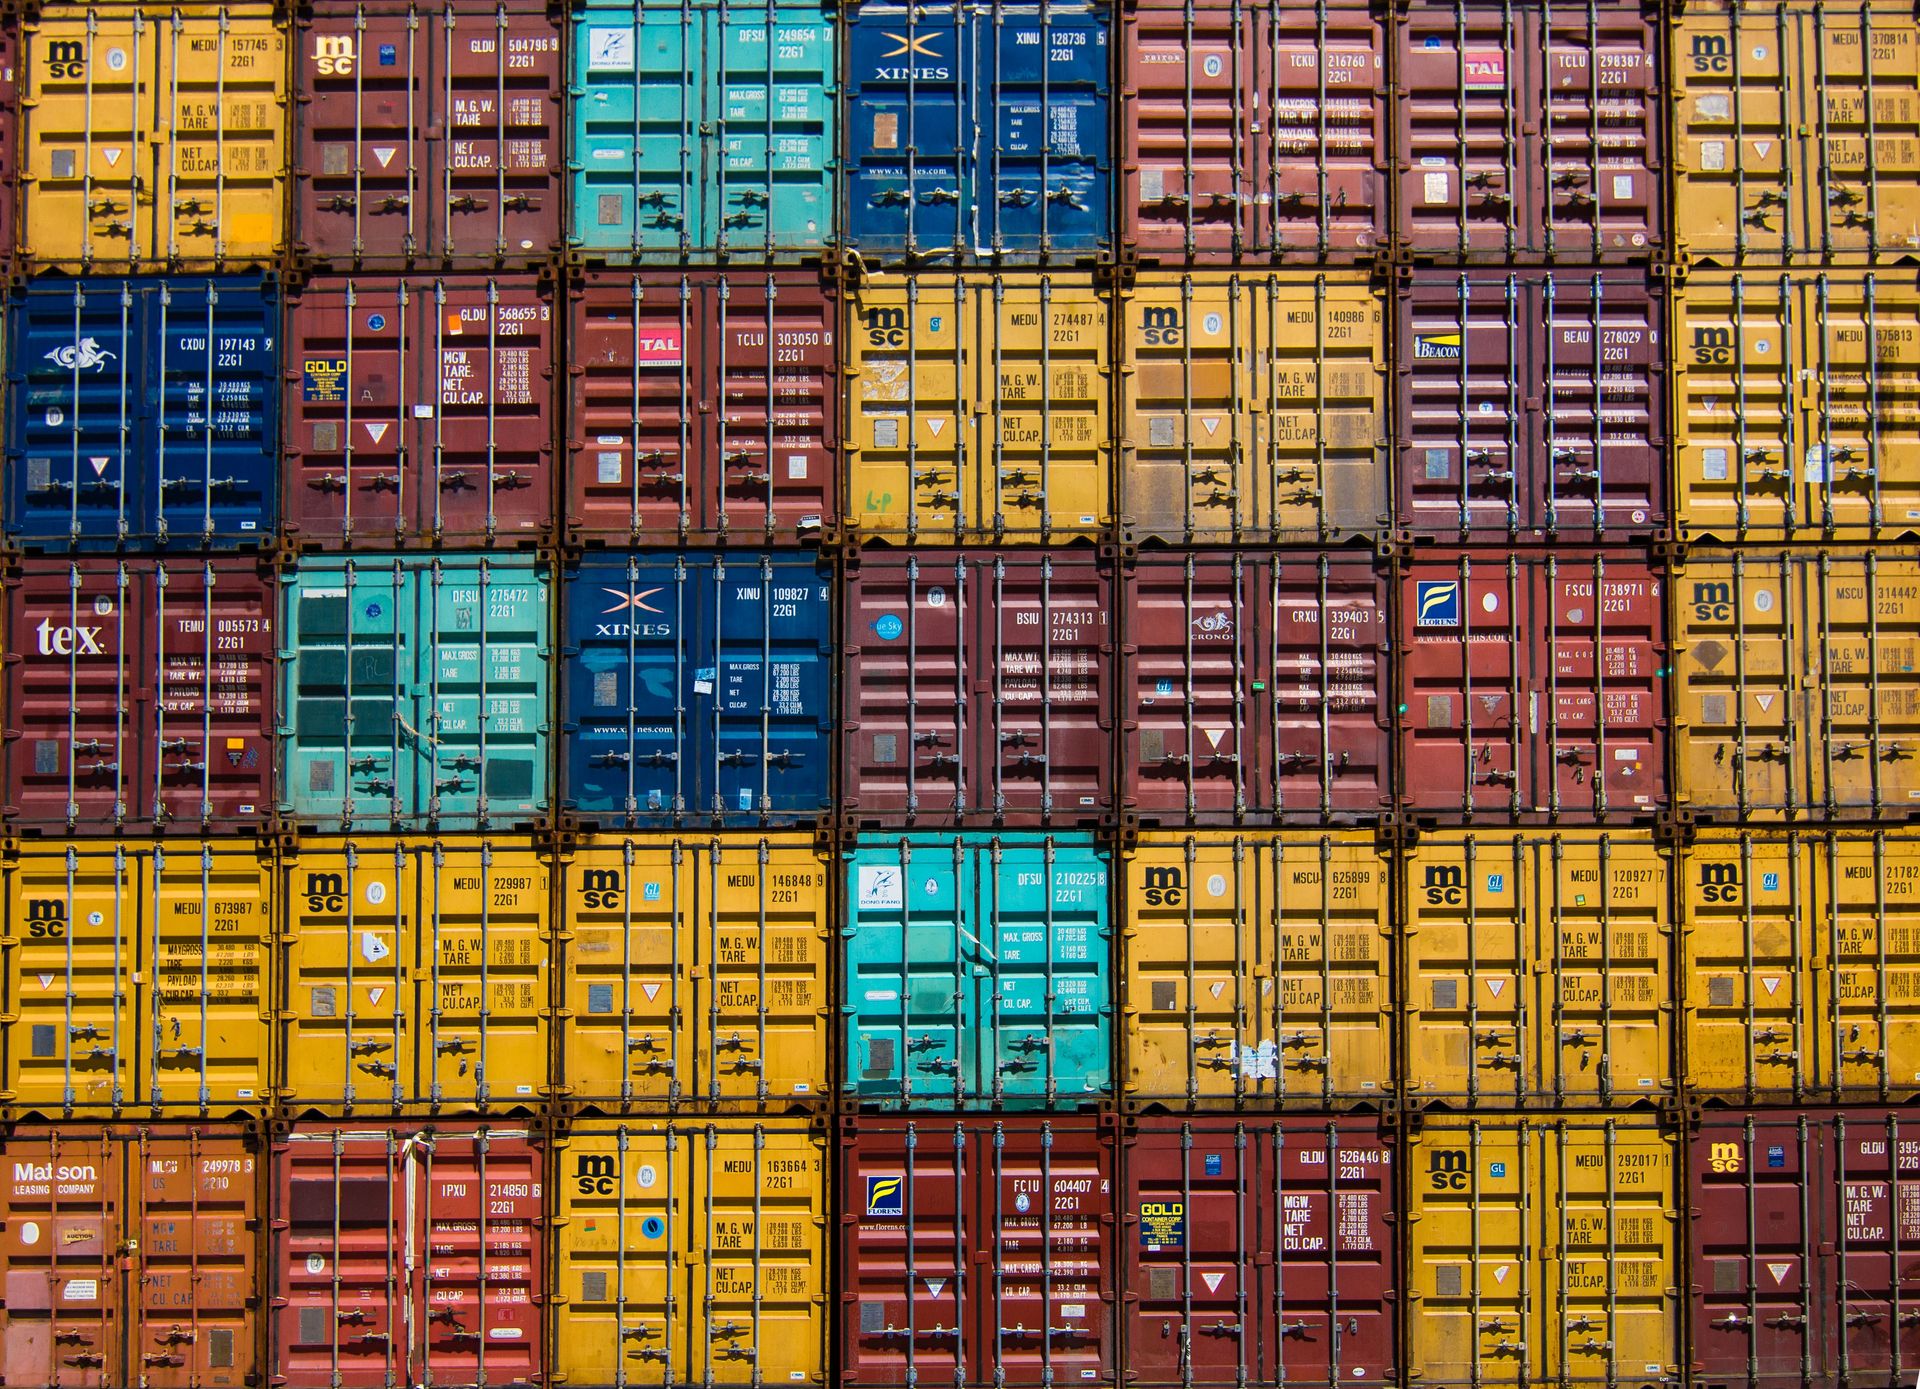 How to look into a filesystem of a stopped Docker container